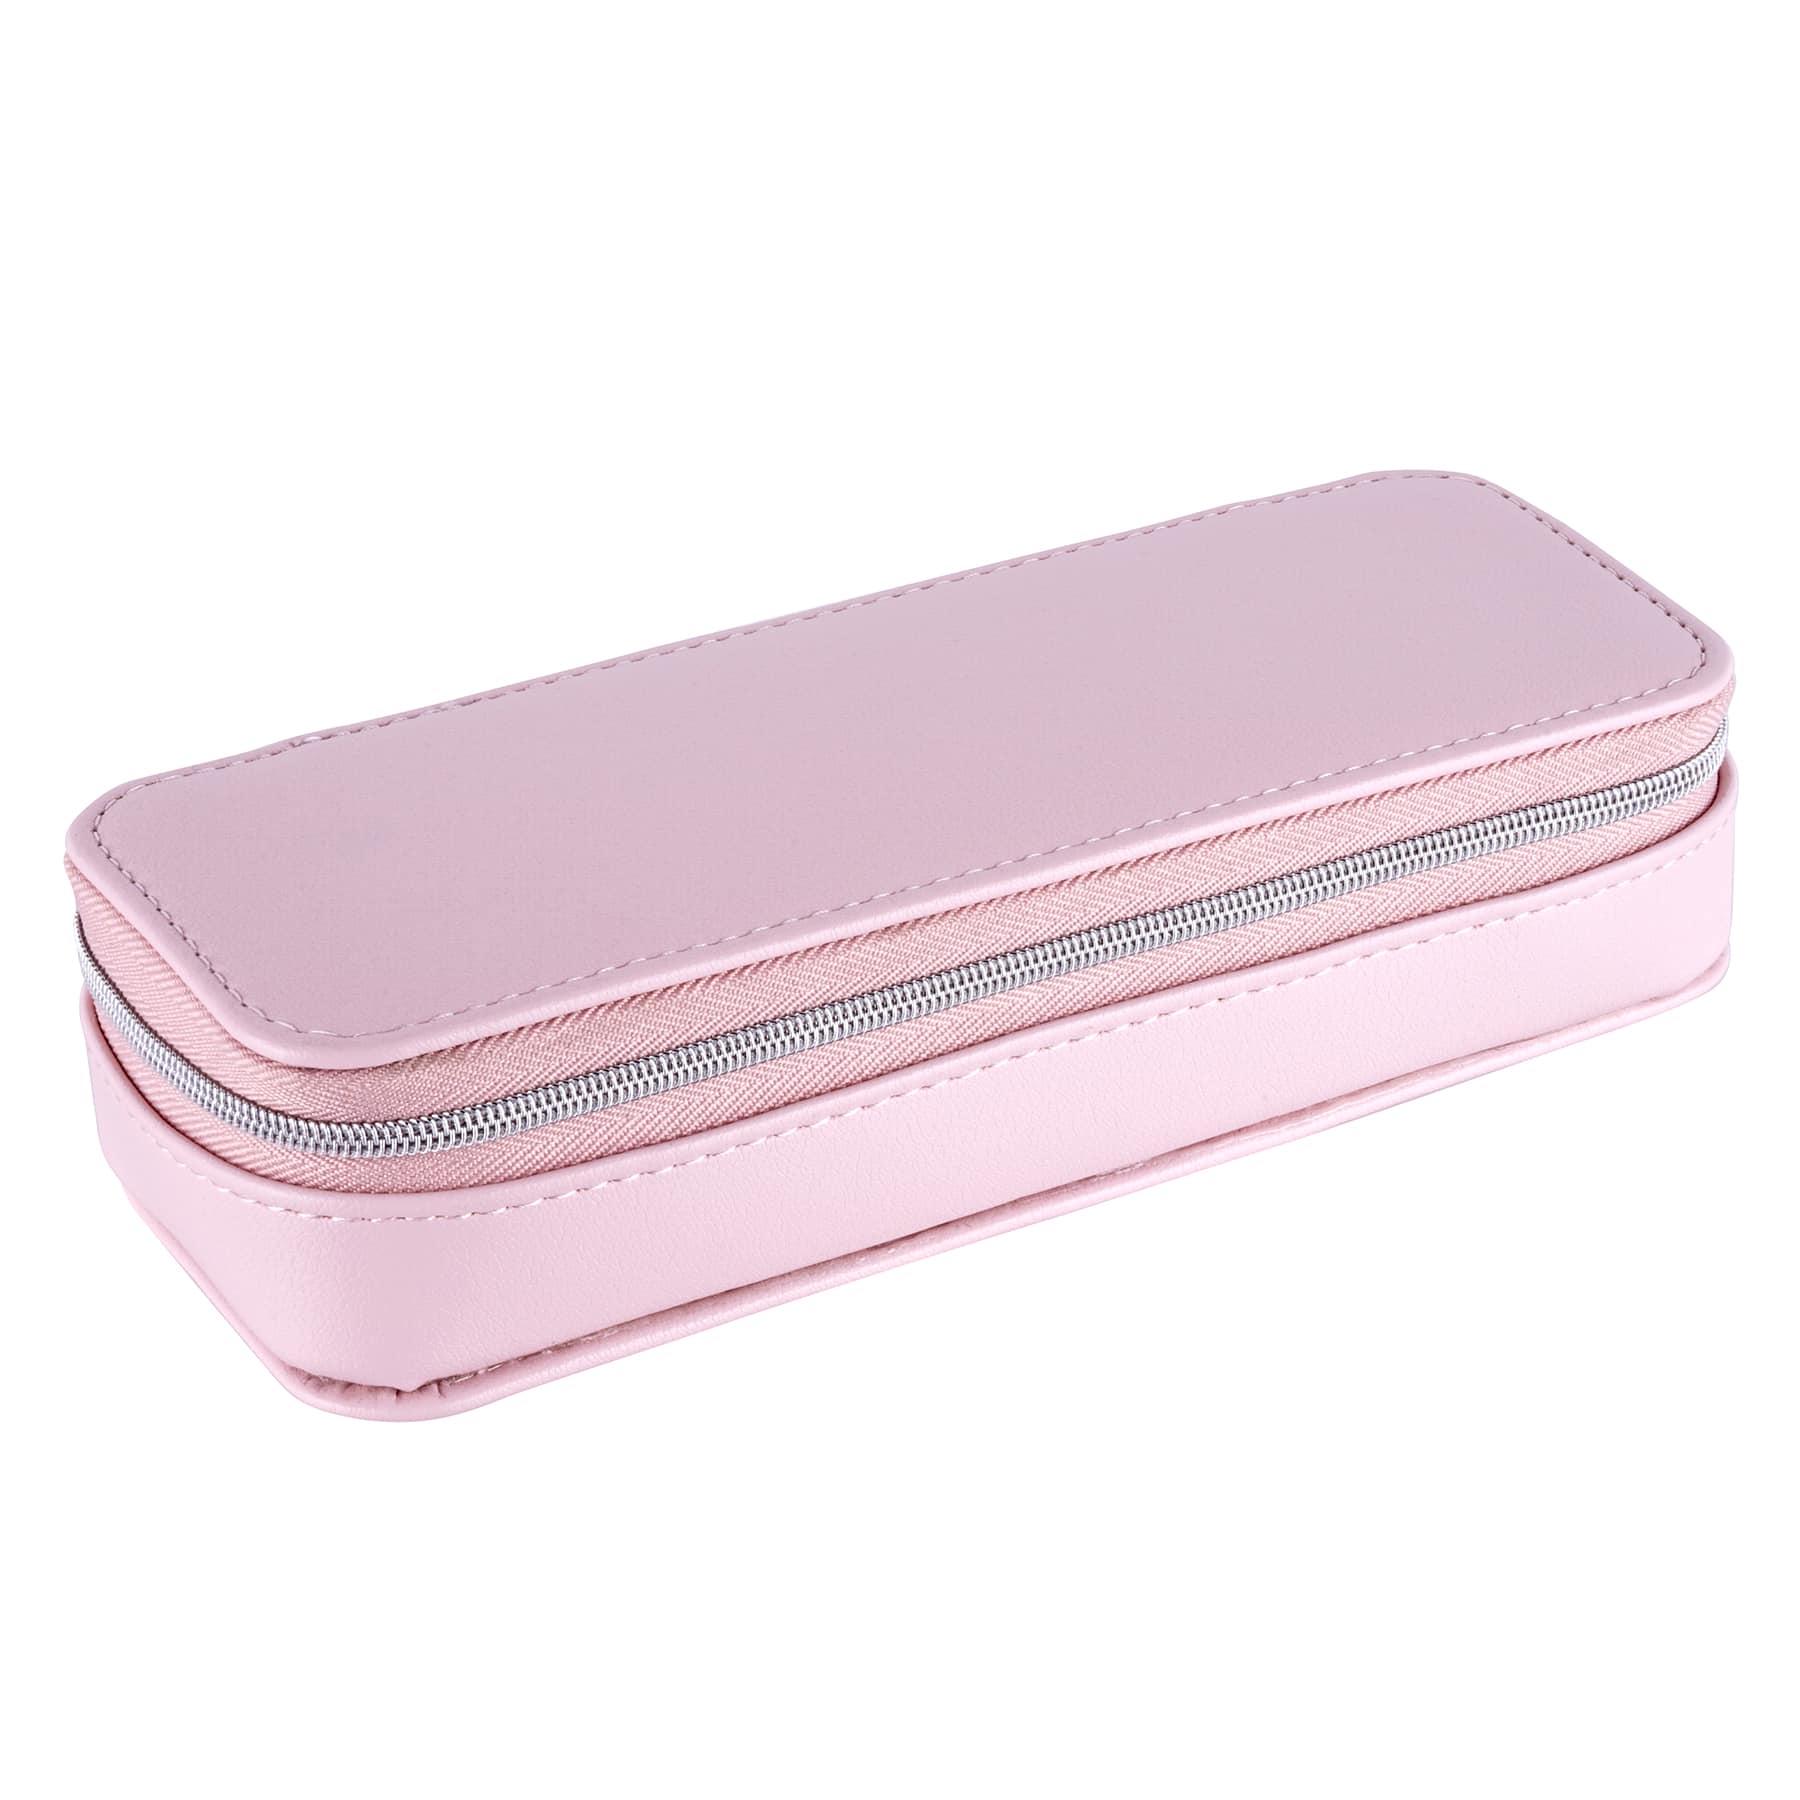 Spring roll pencil case] Large capacity / small storage bag / Wen